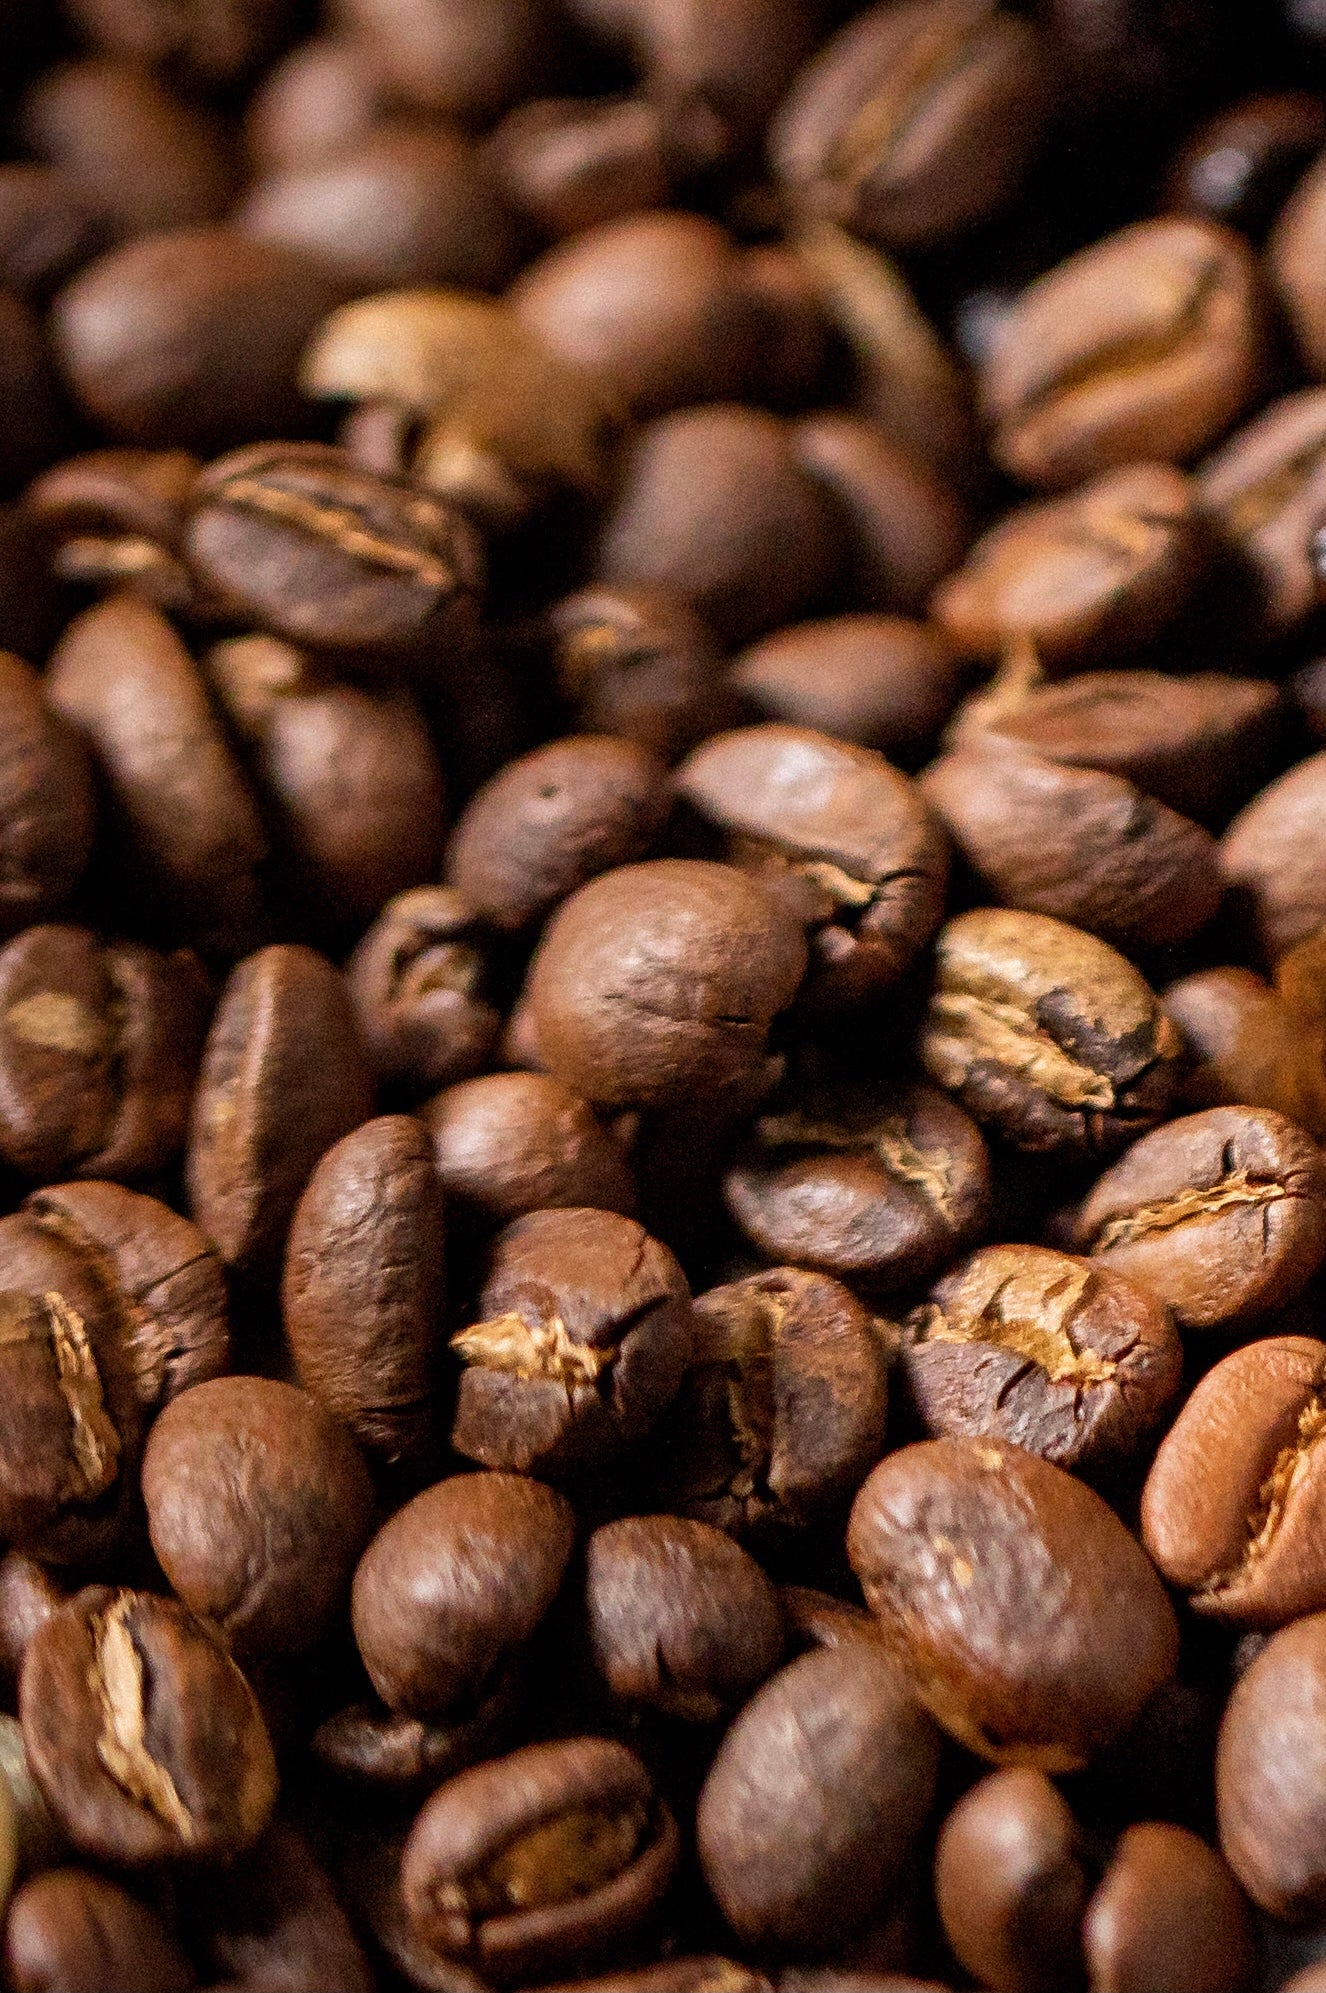 Freshly roasted Dominican coffee, roast options are light, medium, and dark. You can also choose ground or whole bean.